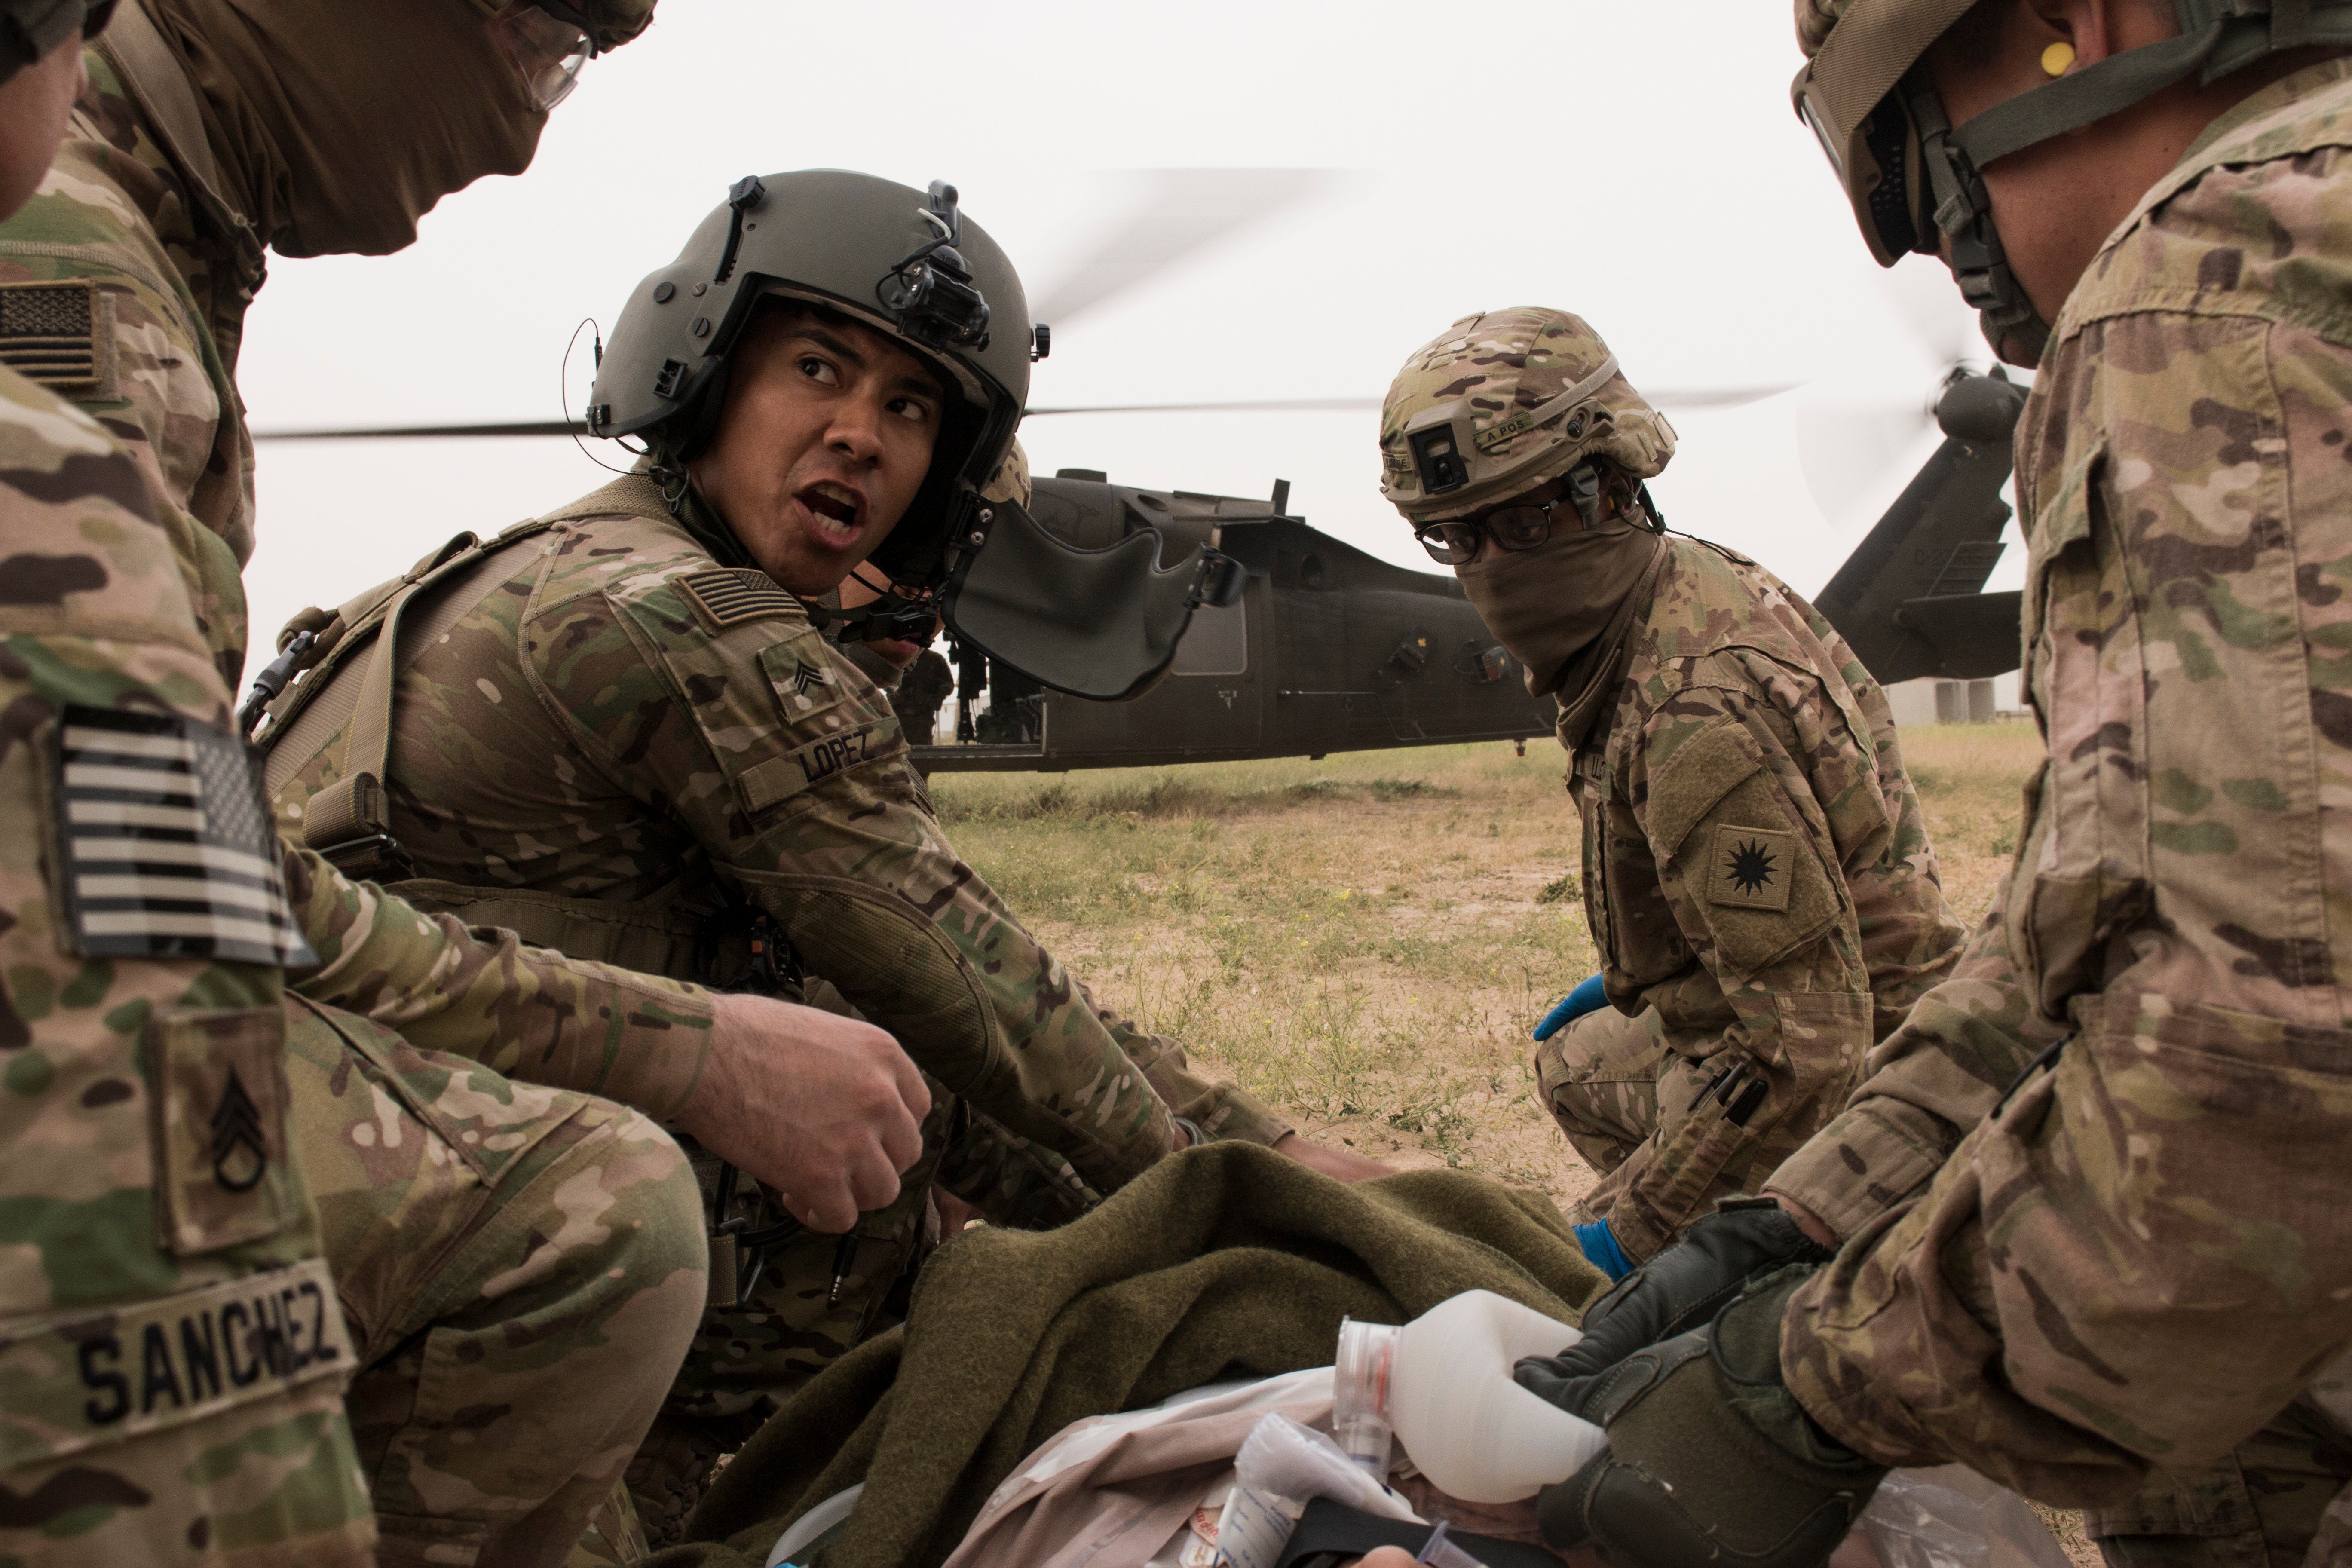 8 unanticipated downsides of cool Army jobs